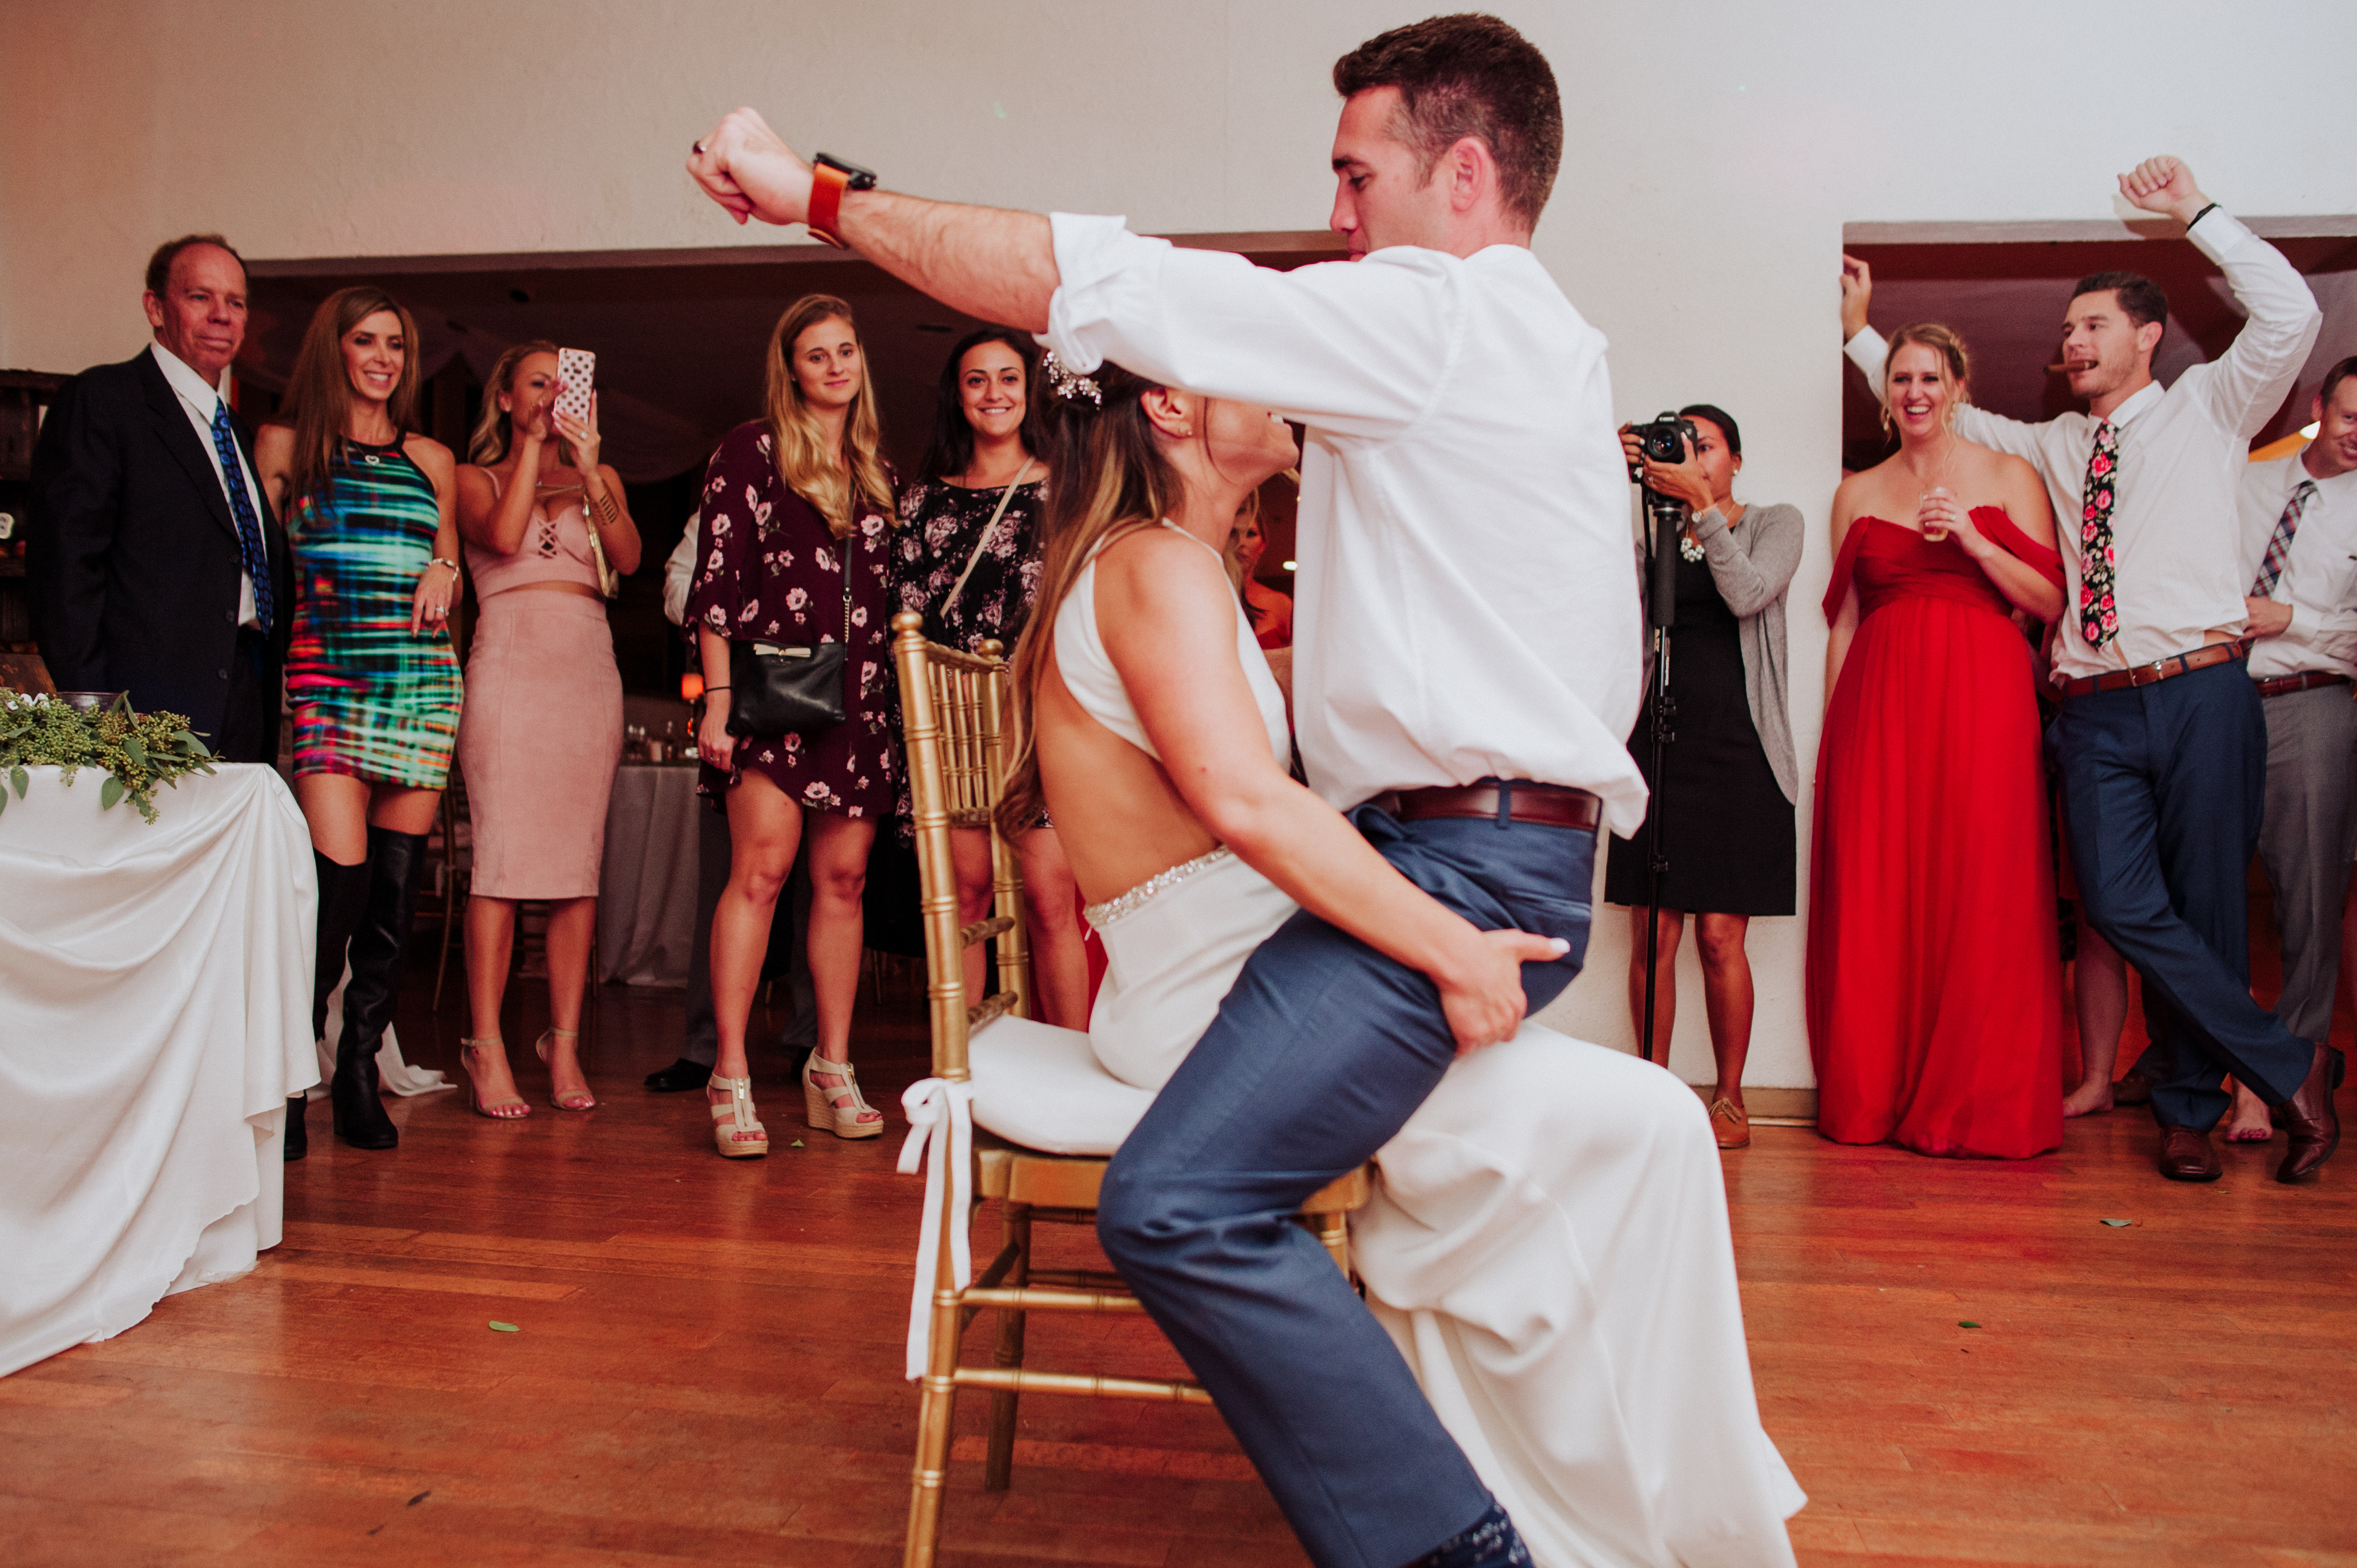 Groom giving his bride a lap danceat a Romantic Style San Diego Wedding at Marina Village by Kylie Rae Photography